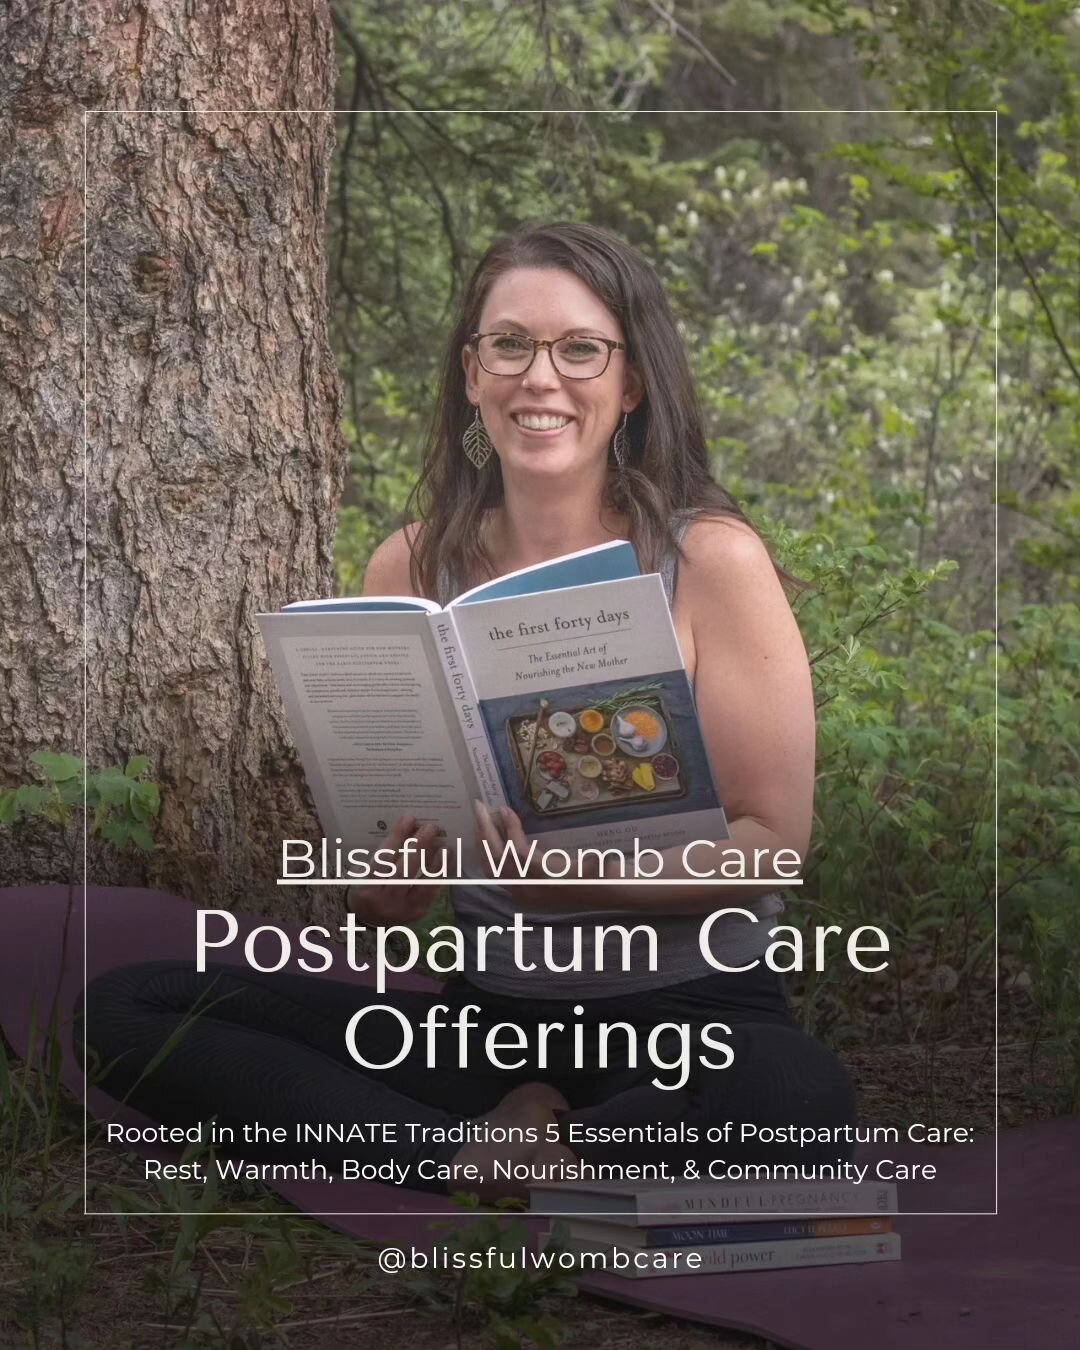 As a certified INNATE Postpartum Care Practitioner, my work is rooted in the 5 Essentials of Postpartum Care:

✨️ Rest, Warmth, Body Care, Nourishment, &amp; Community Support

Cross-culturally, these essentials have been integrated into all traditio